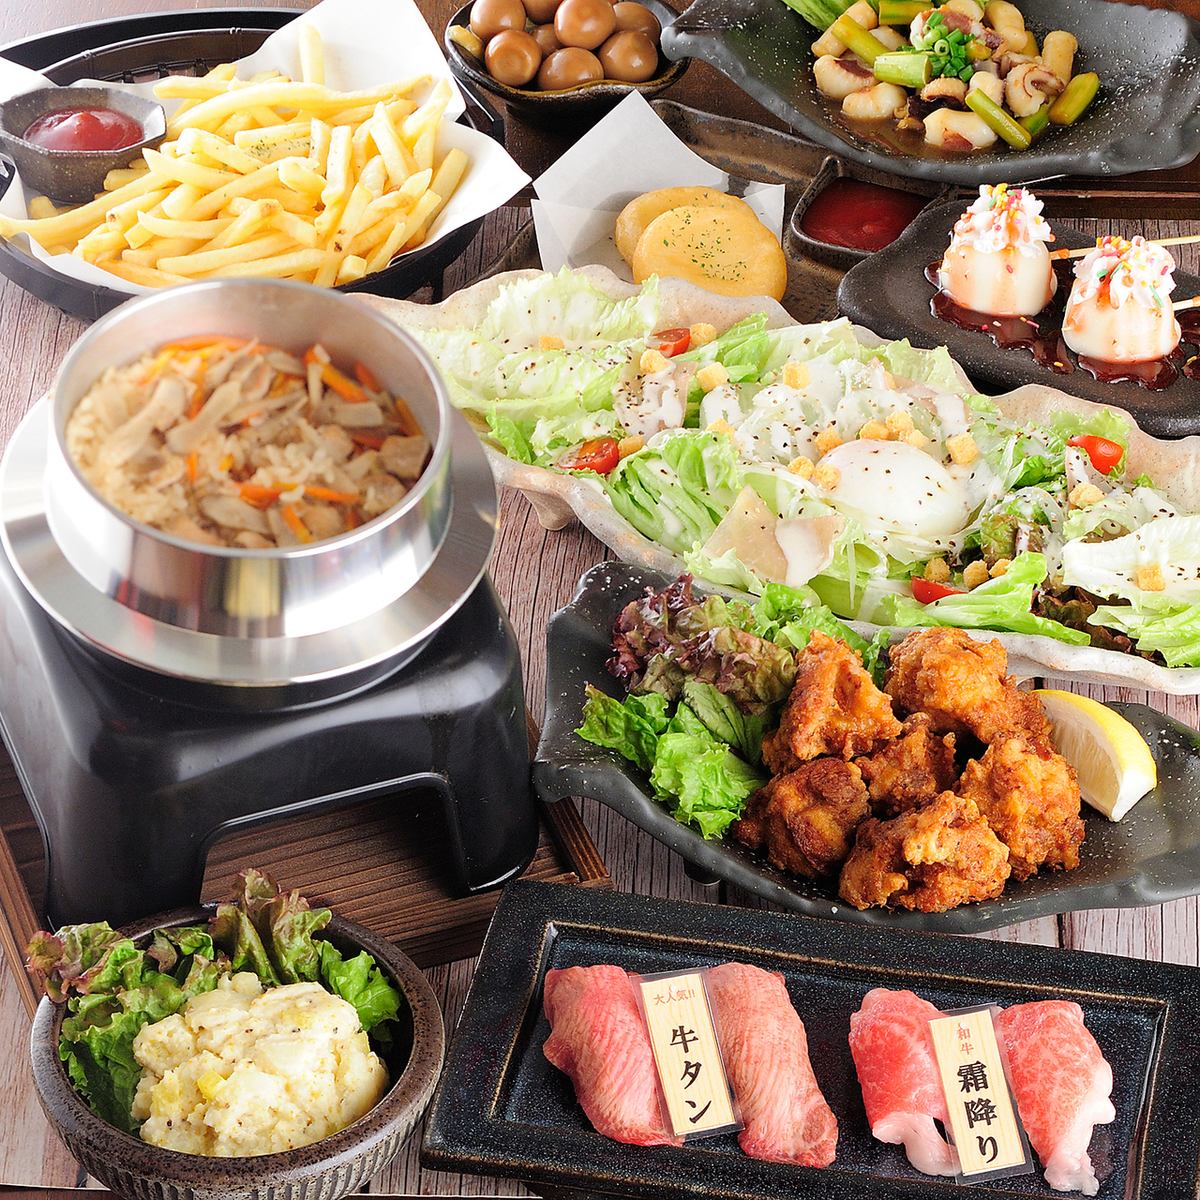 Our most popular plan is the all-you-can-drink plan with 11 dishes for 3,000 yen (tax included).